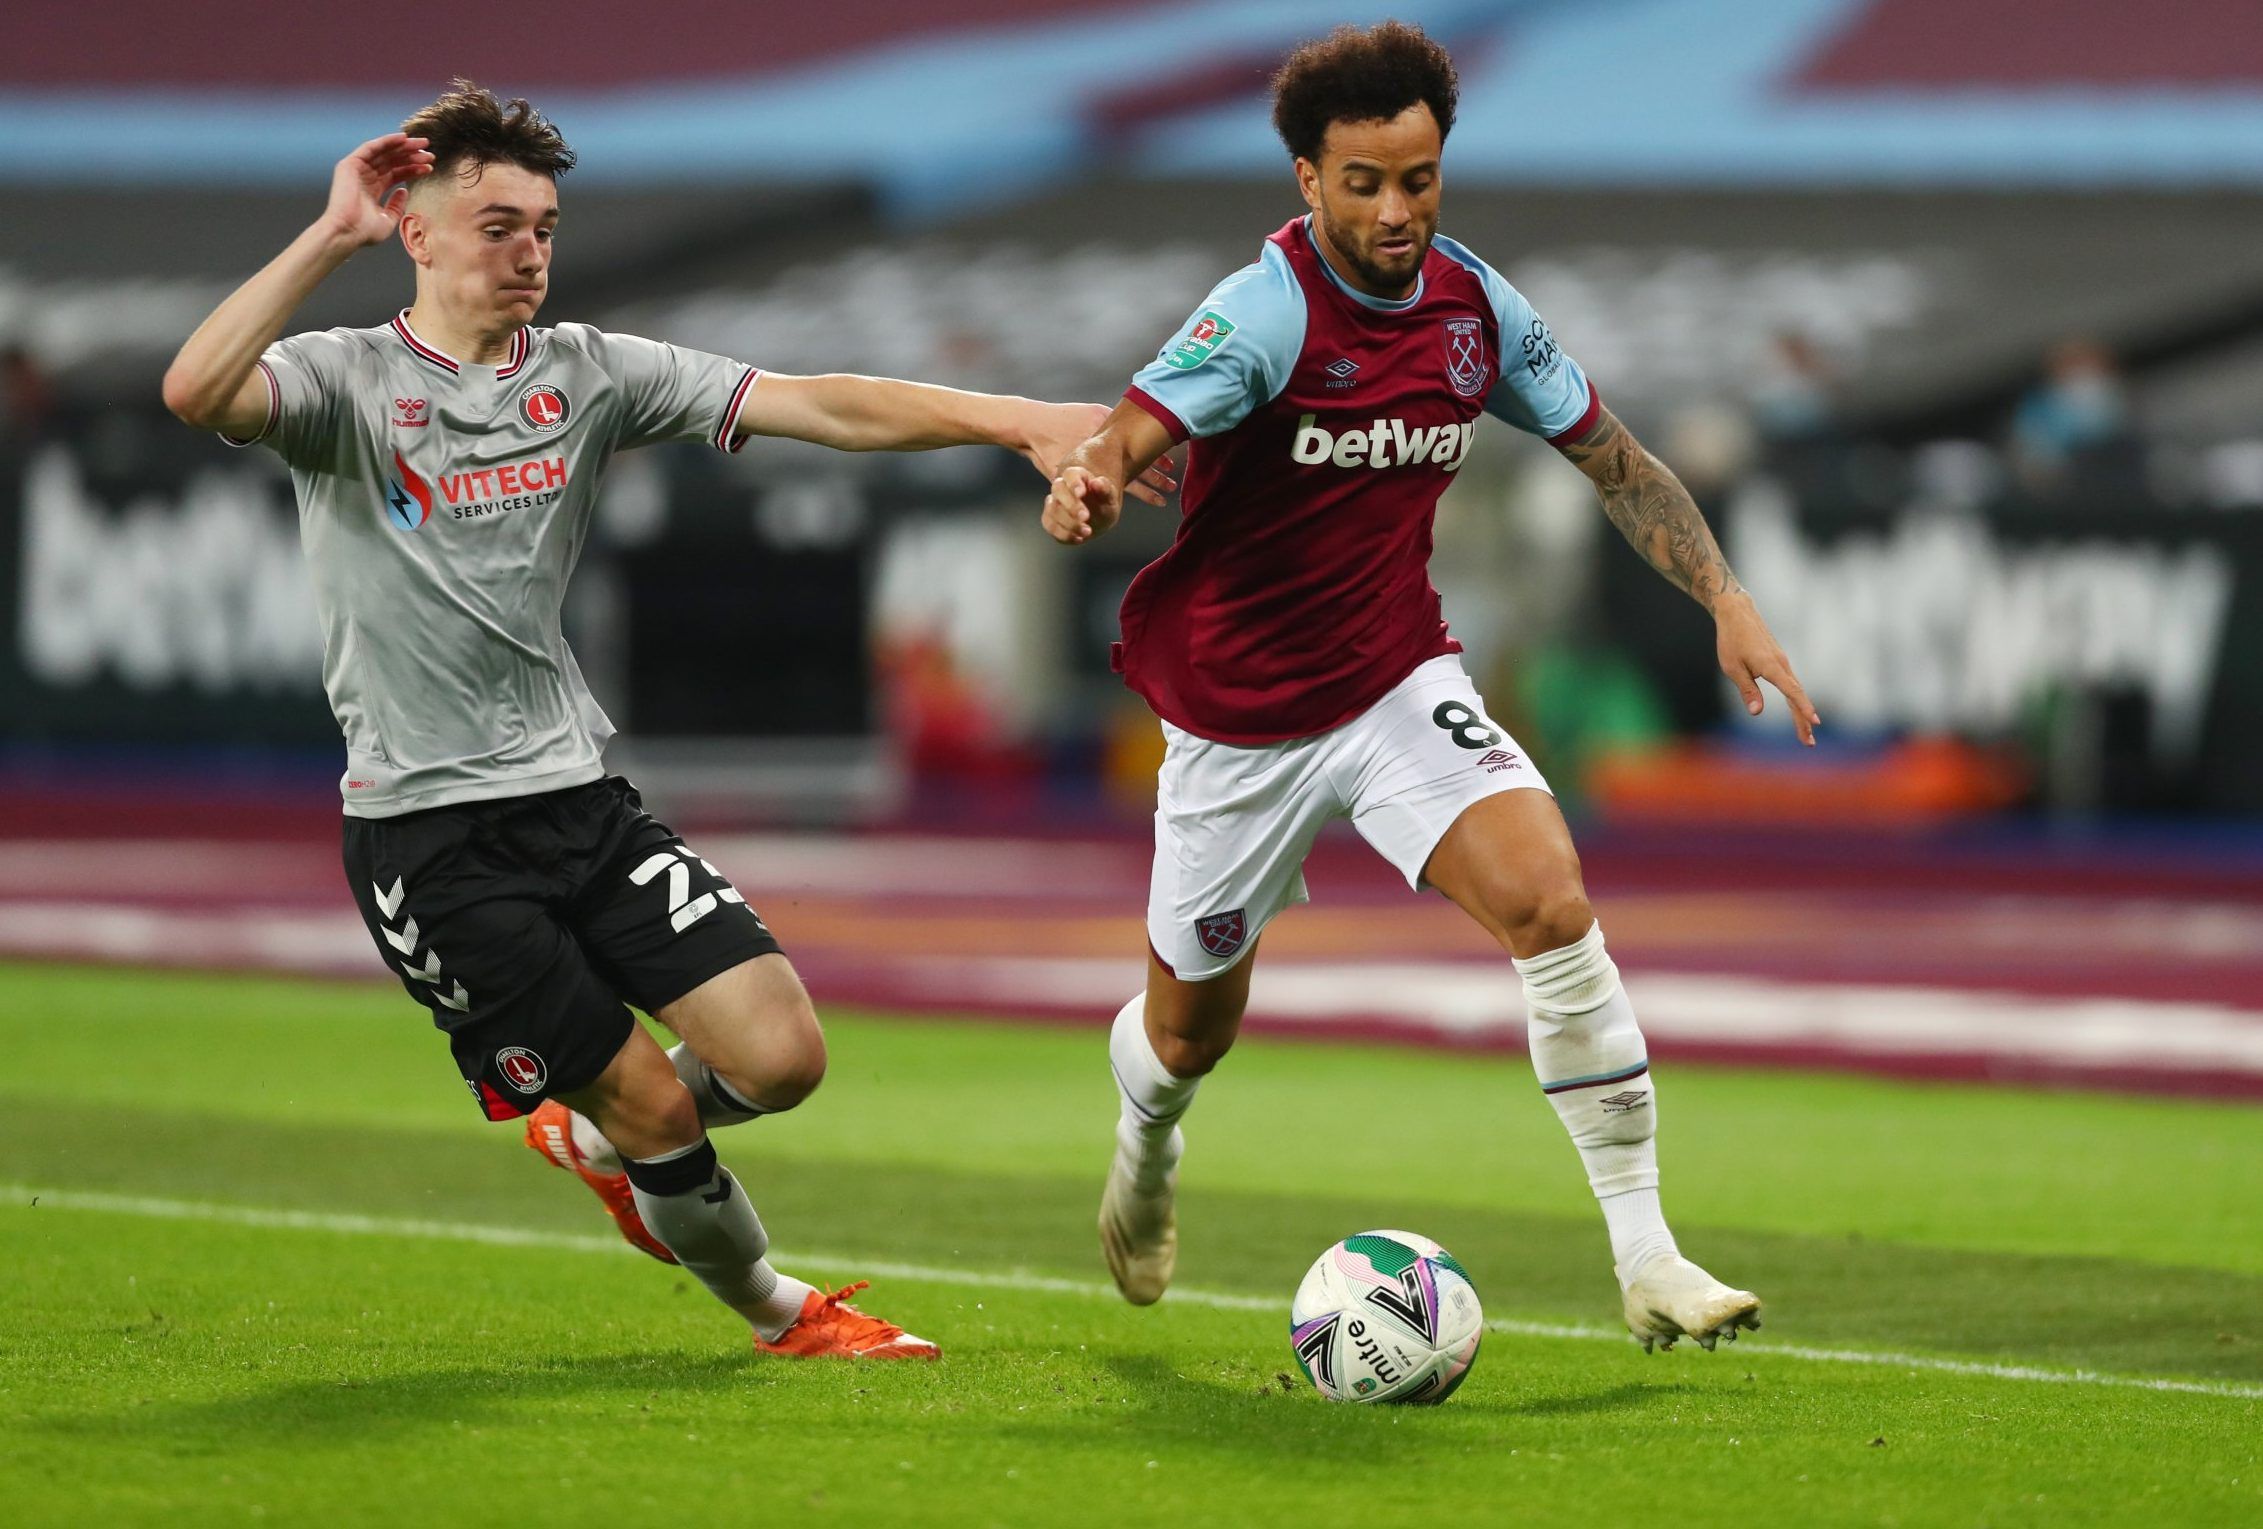 west ham winger felipe anderson in action agianst charlton athletic carabao cup